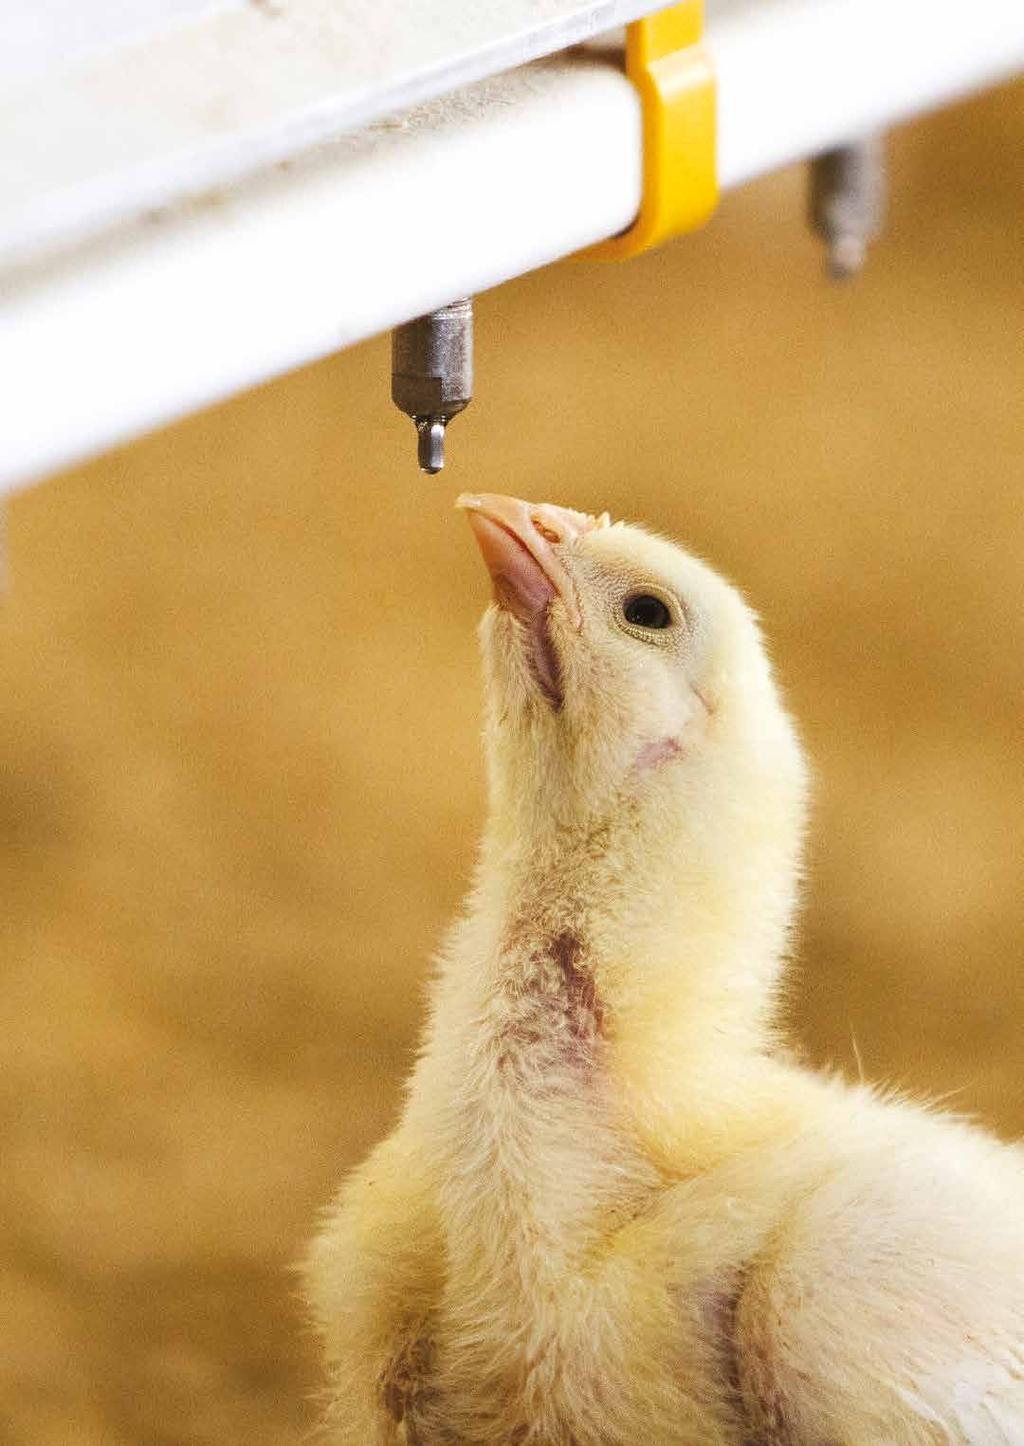 BIG ACHIEVEMENTS OF THE POULTRY MEAT INDUSTRY STOPPED prophylactic use of antibiotics STOPPED use of Colistin NEW ANTIBIOTIC STANDARDS for Red Tractor Poultry Assurance RESULTING IN A 71% Reduction